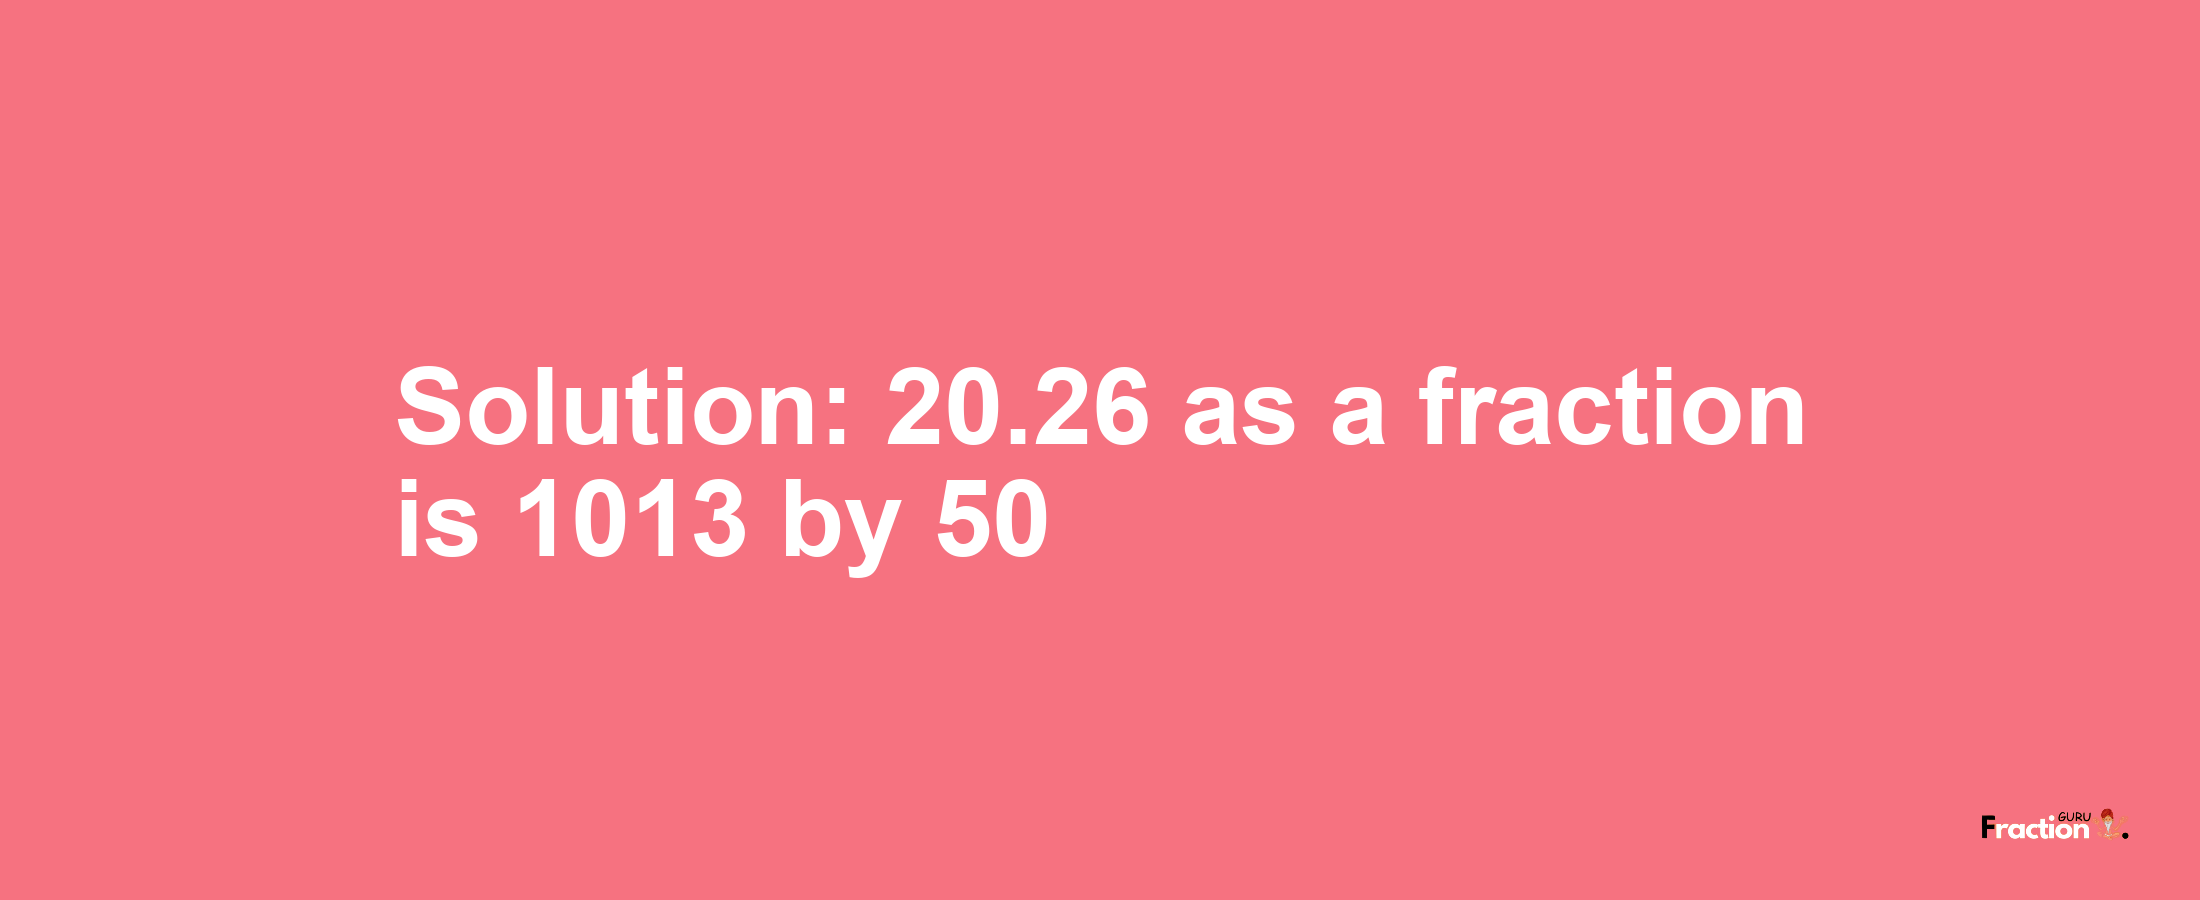 Solution:20.26 as a fraction is 1013/50